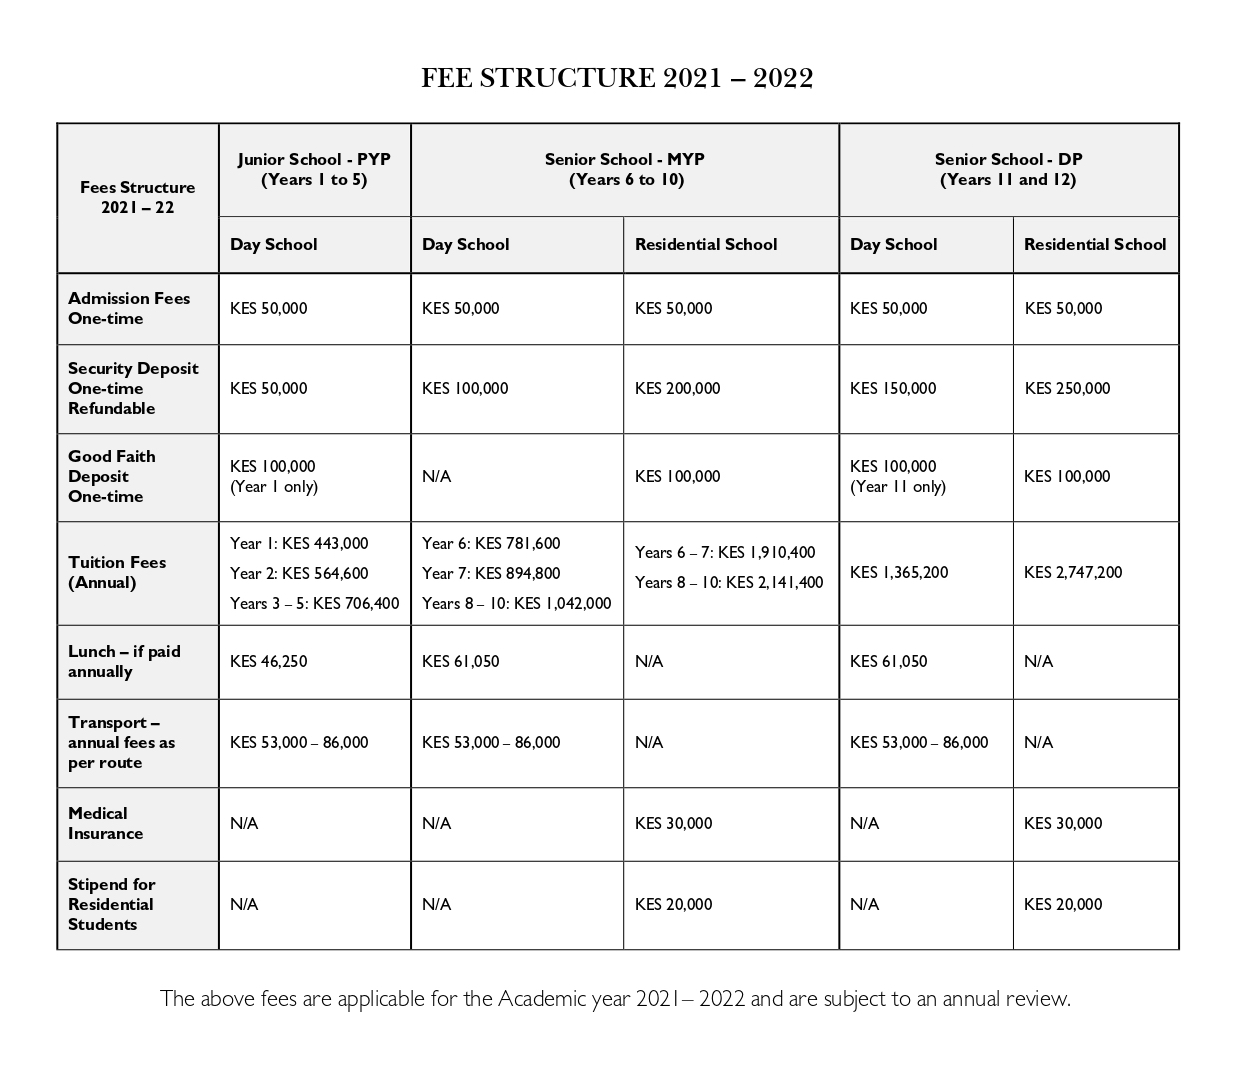 Fees Structure 2021-2022